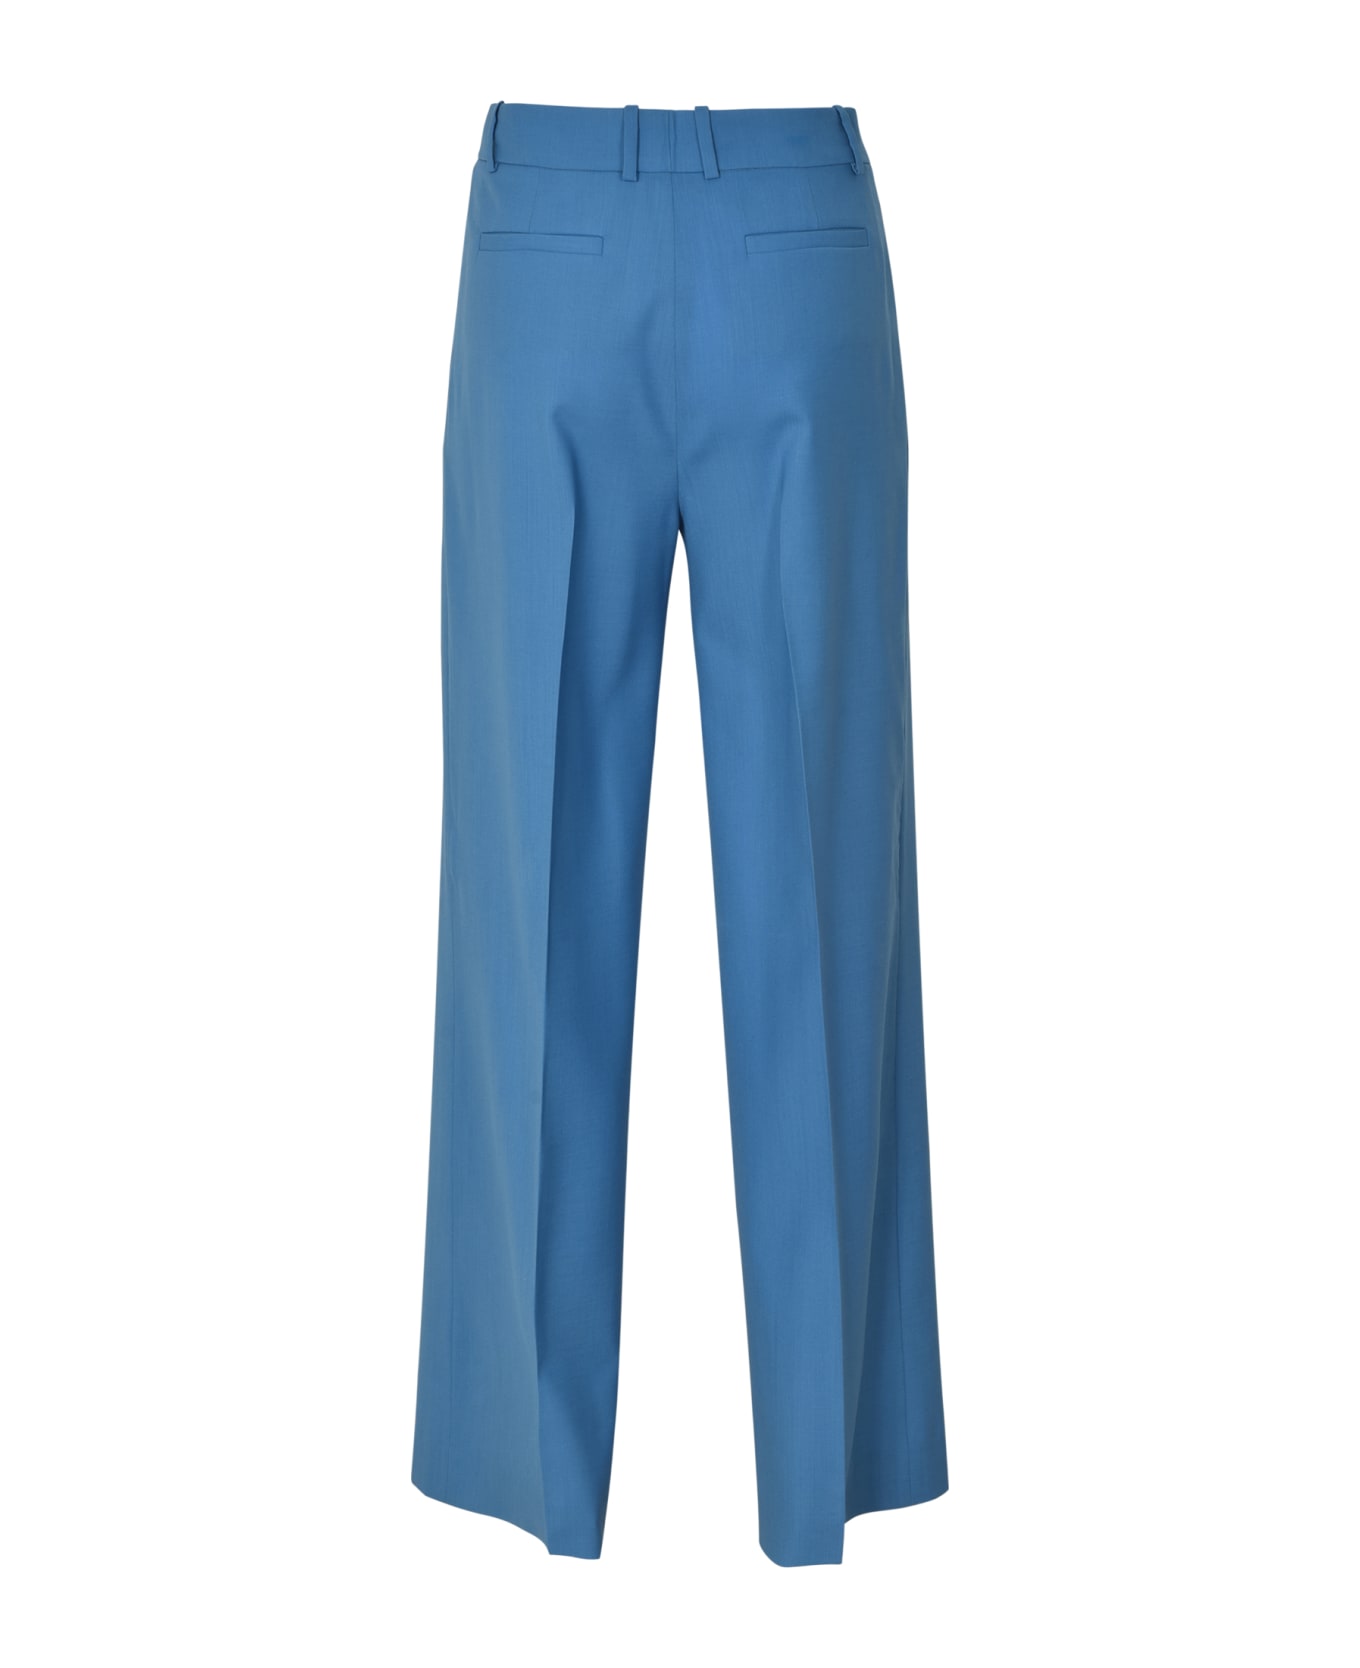 QL2 Straight Trousers - Turquoise ボトムス